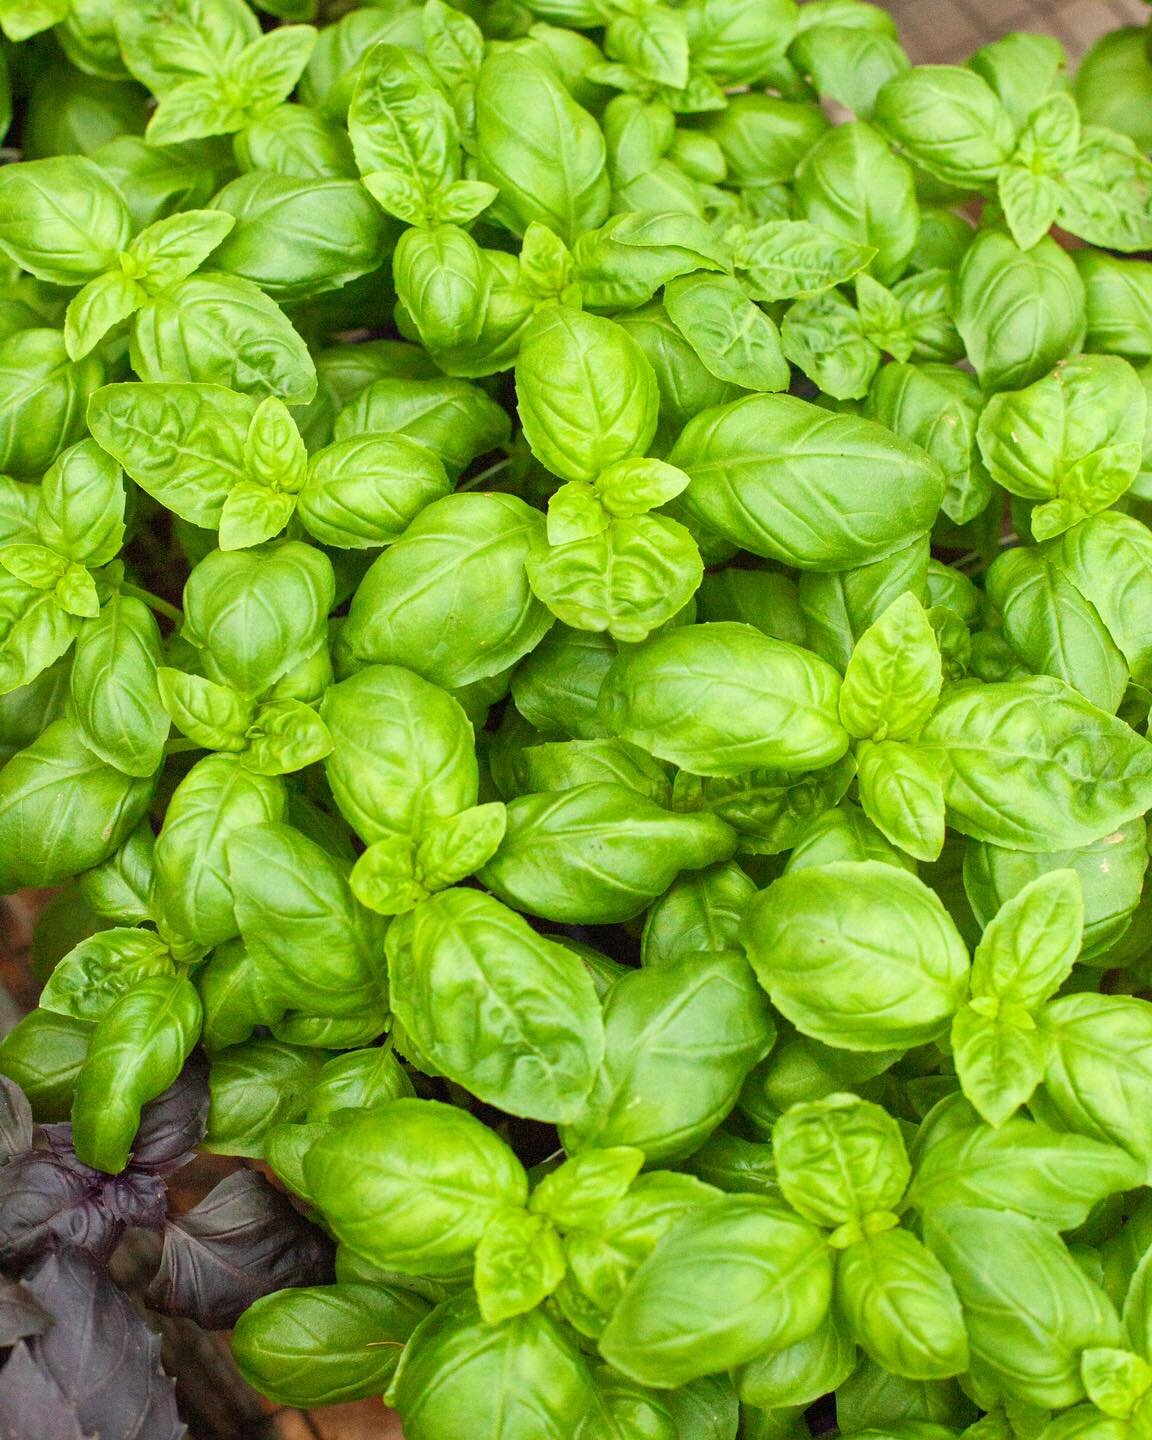 Basil! So fragrant and with tons of flavors, come get your pick while our varieties are all here!